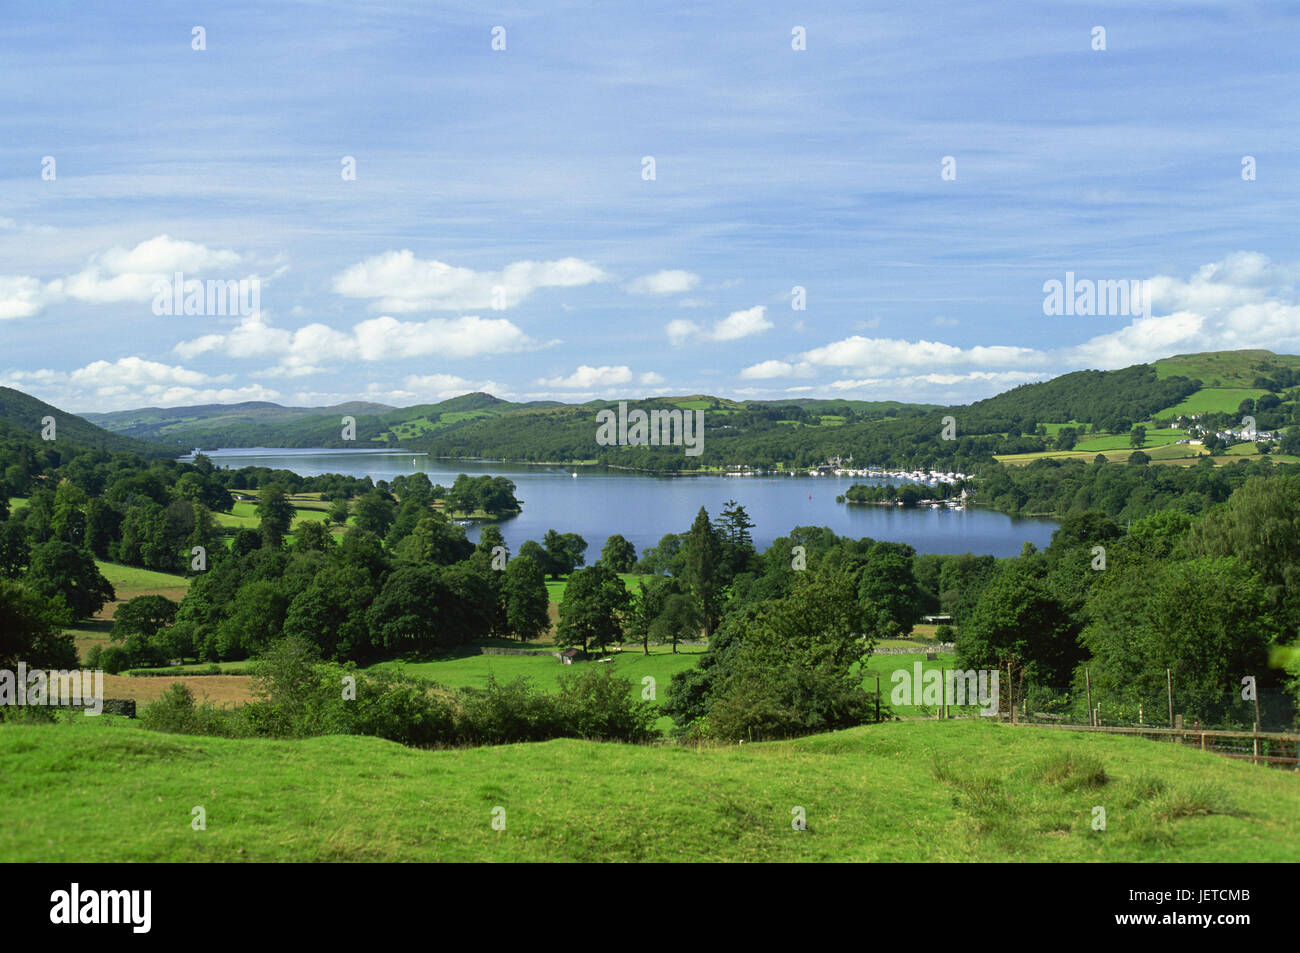 Great Britain, England, Cumbria, brine District, Coniston Water, lake, scenery, Europe, meadows, green, trees, water, nature, Idyll, deserted, width, distance, sky, clouds, sunny, Stock Photo